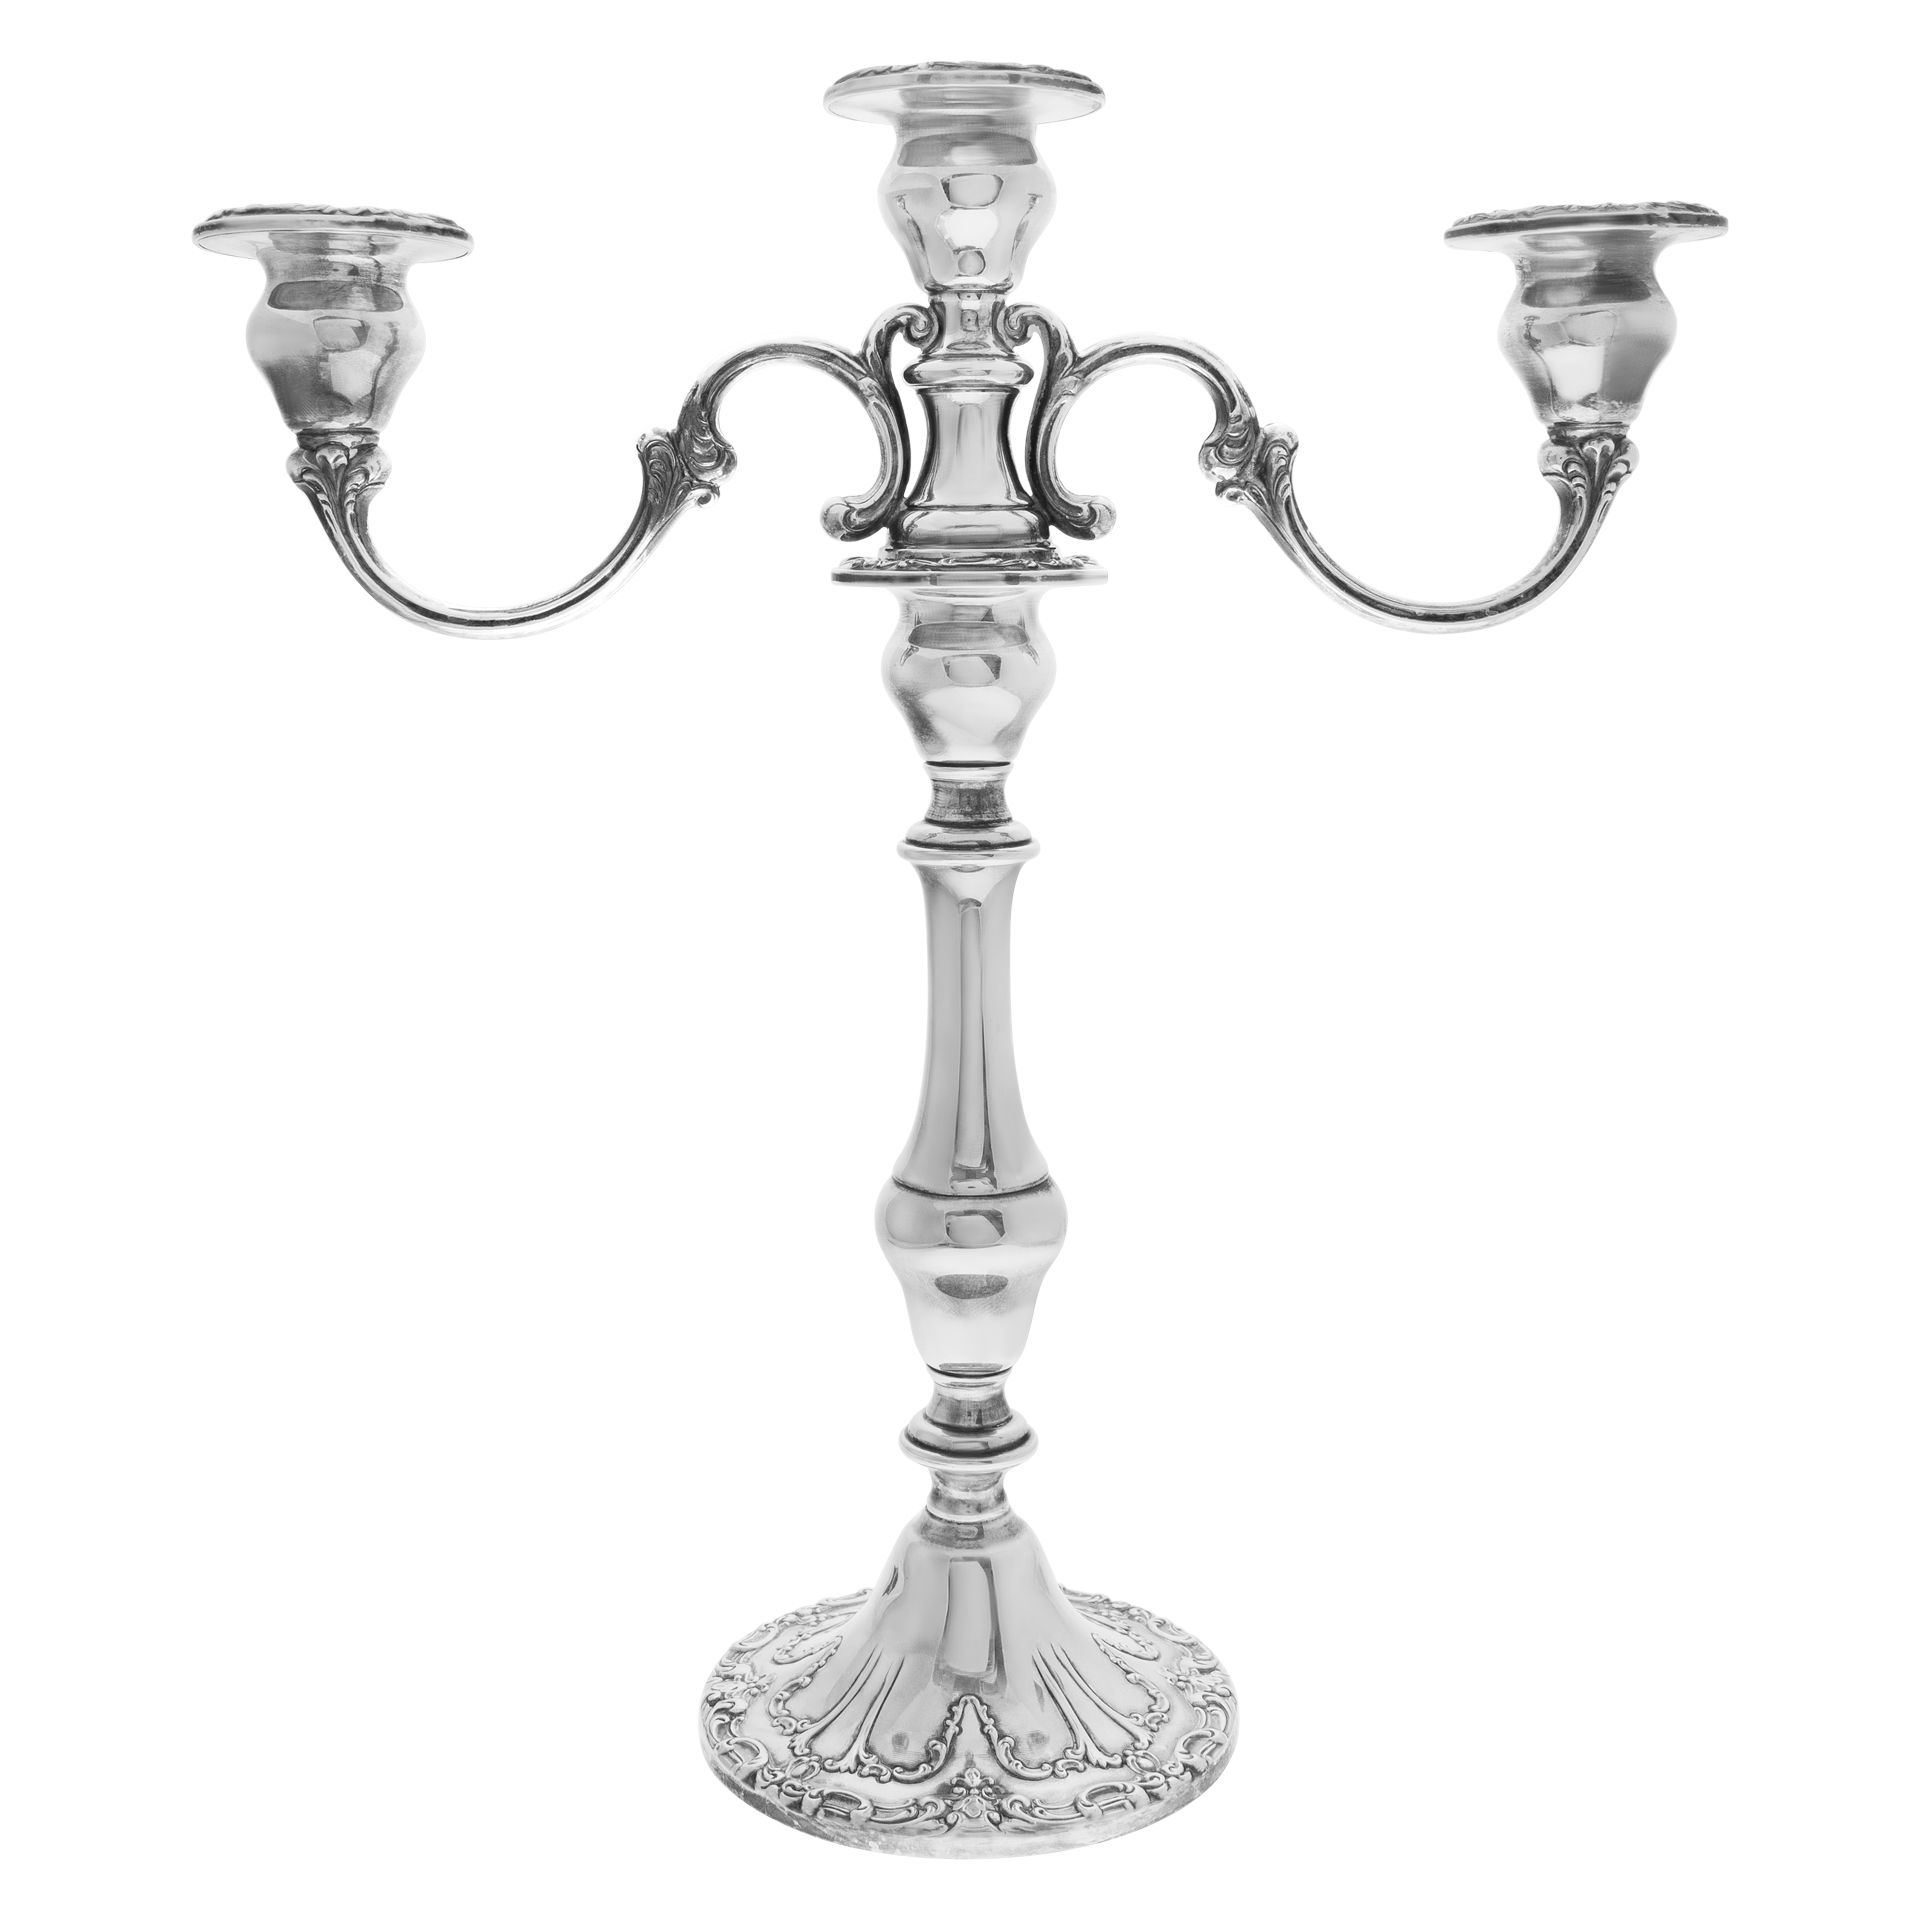 Pair of sterling silver 3 tiers candelabra by Gorham.